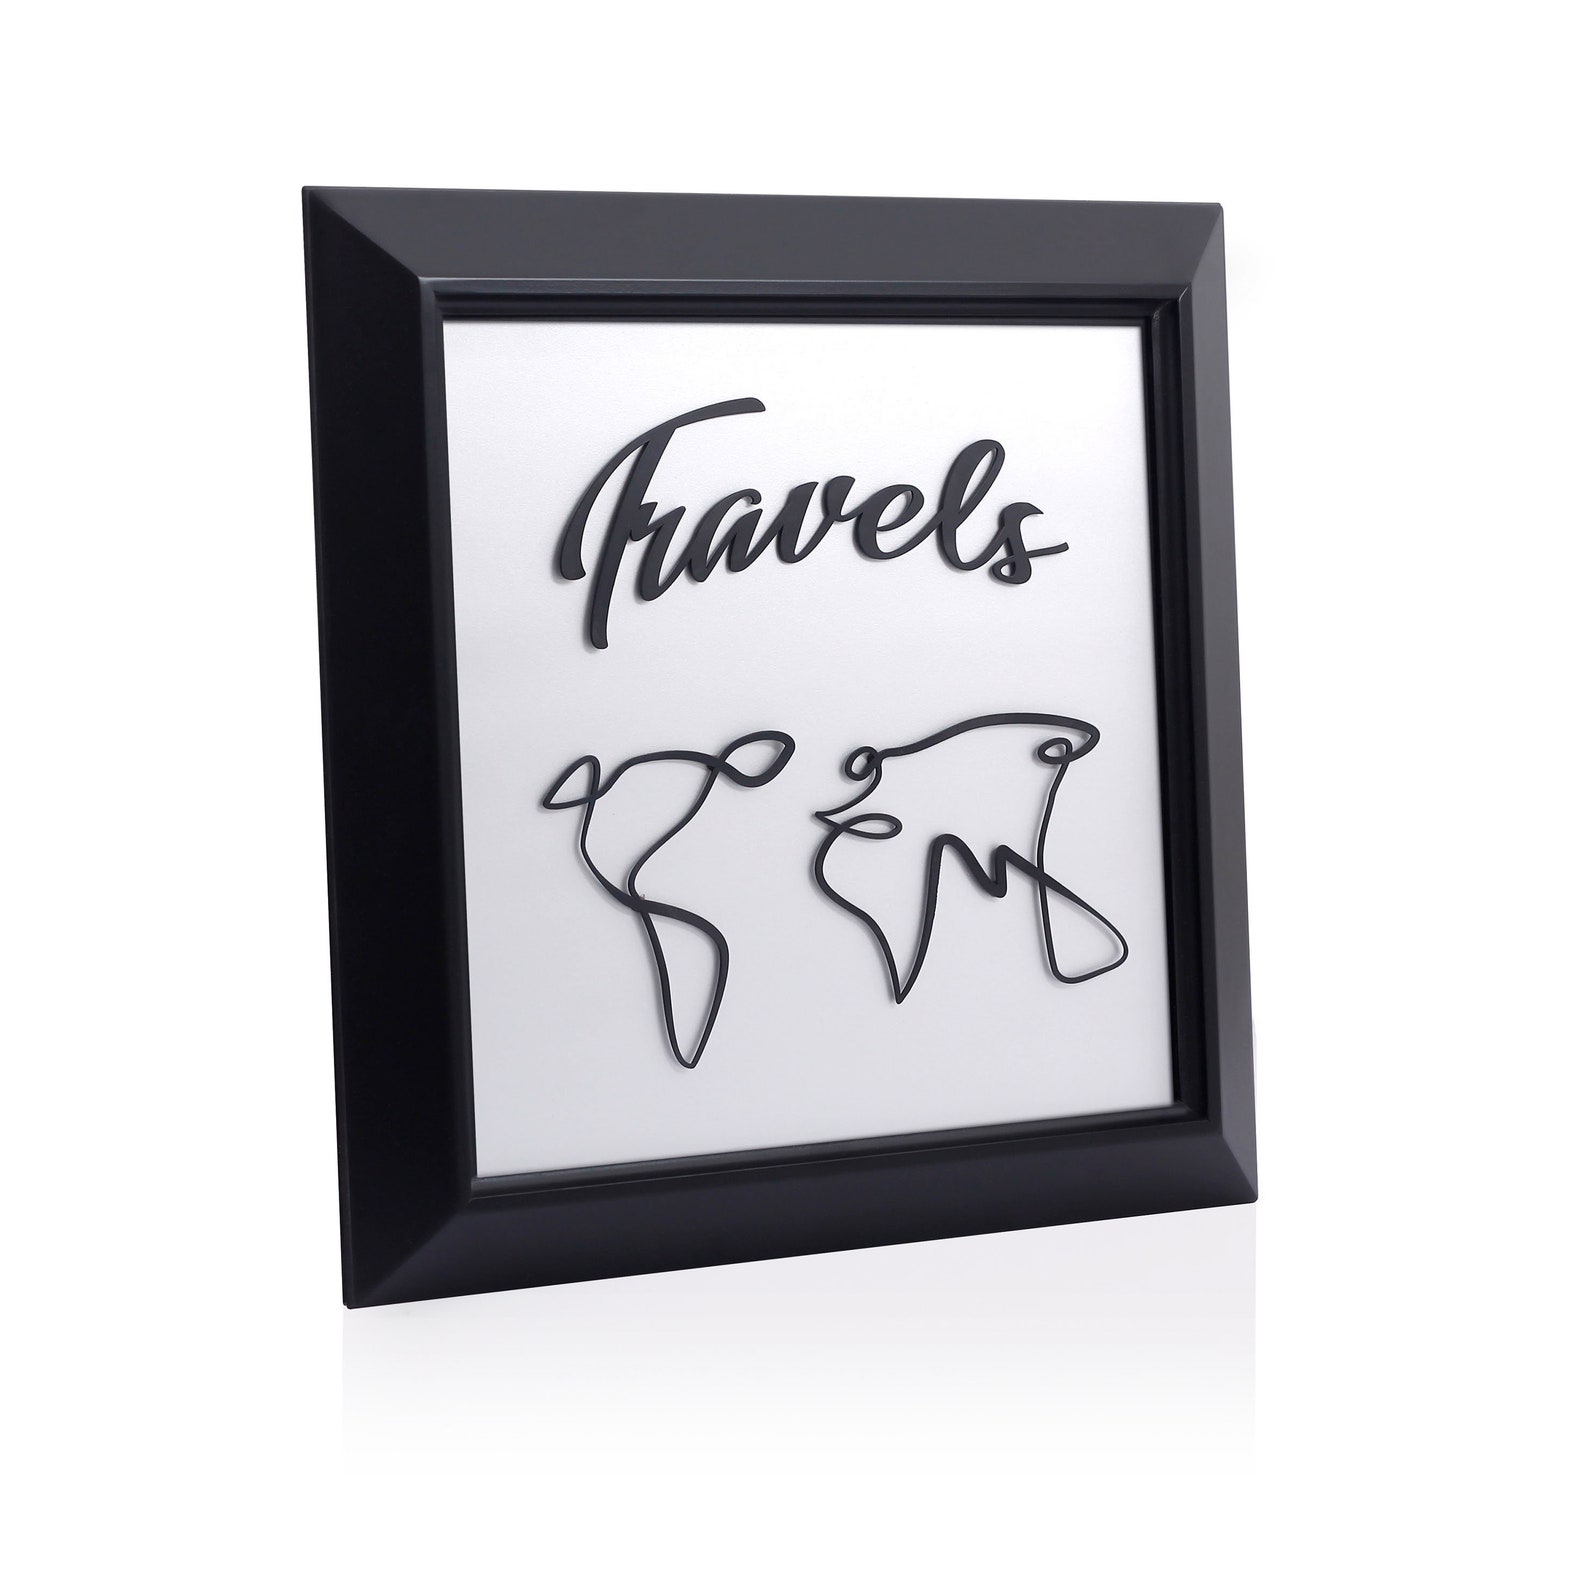 travel frame for painting